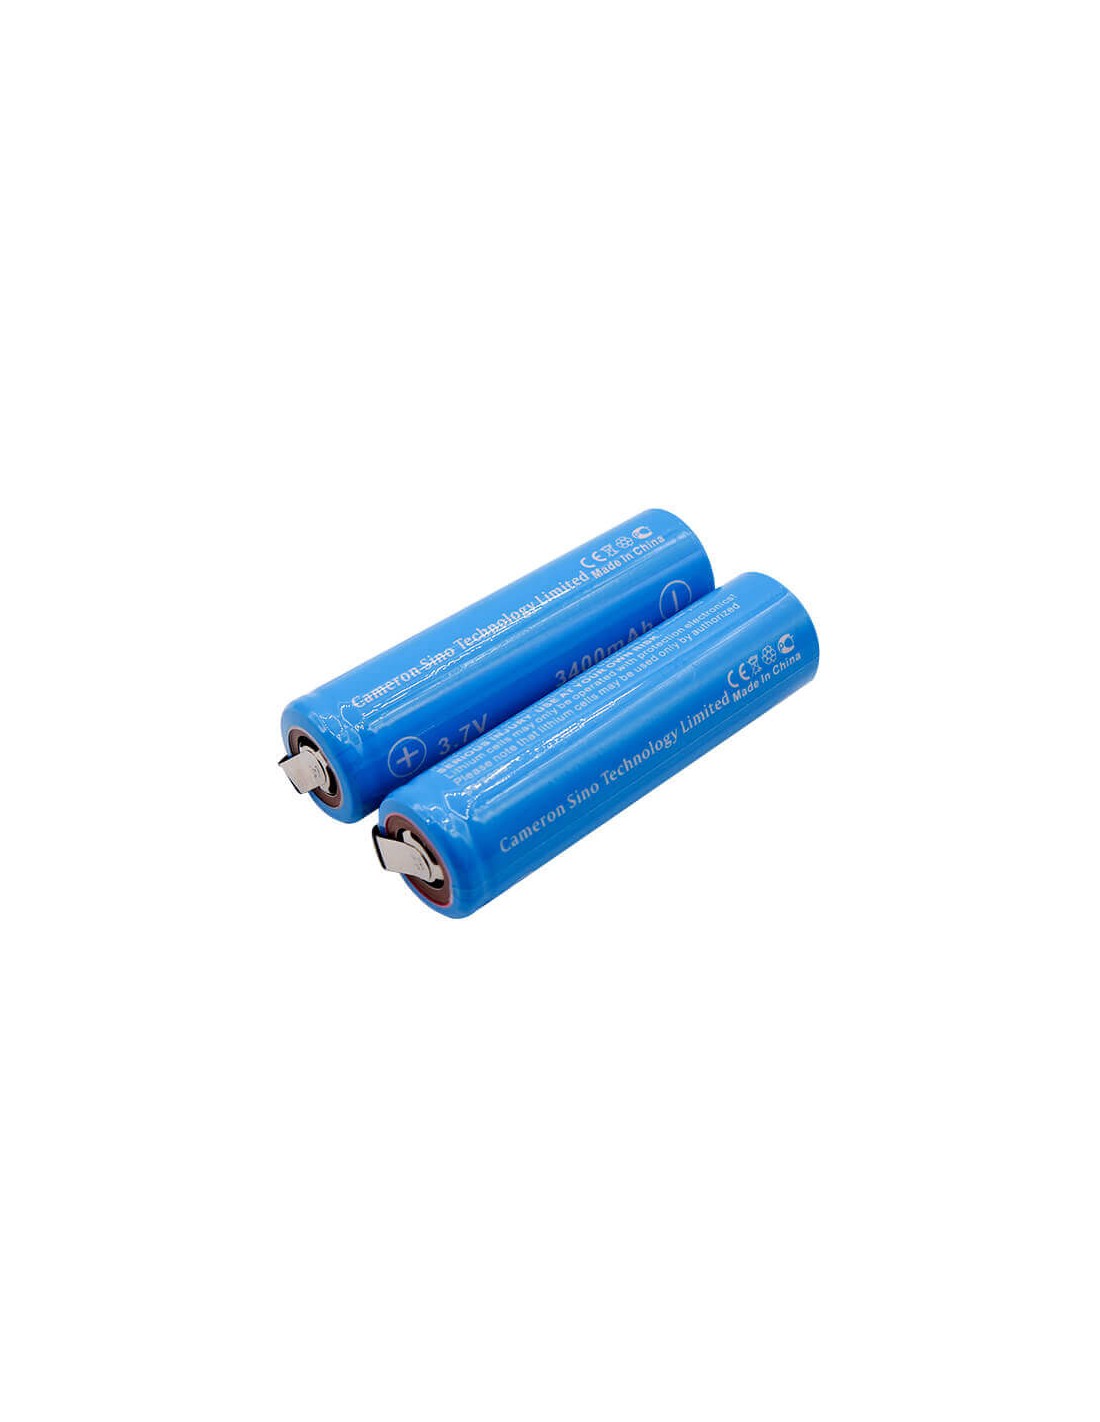 Battery for Lithium Ion, 2pcs Pack With Solder Tabs 3.7V, 3400mAh - 12.58Wh